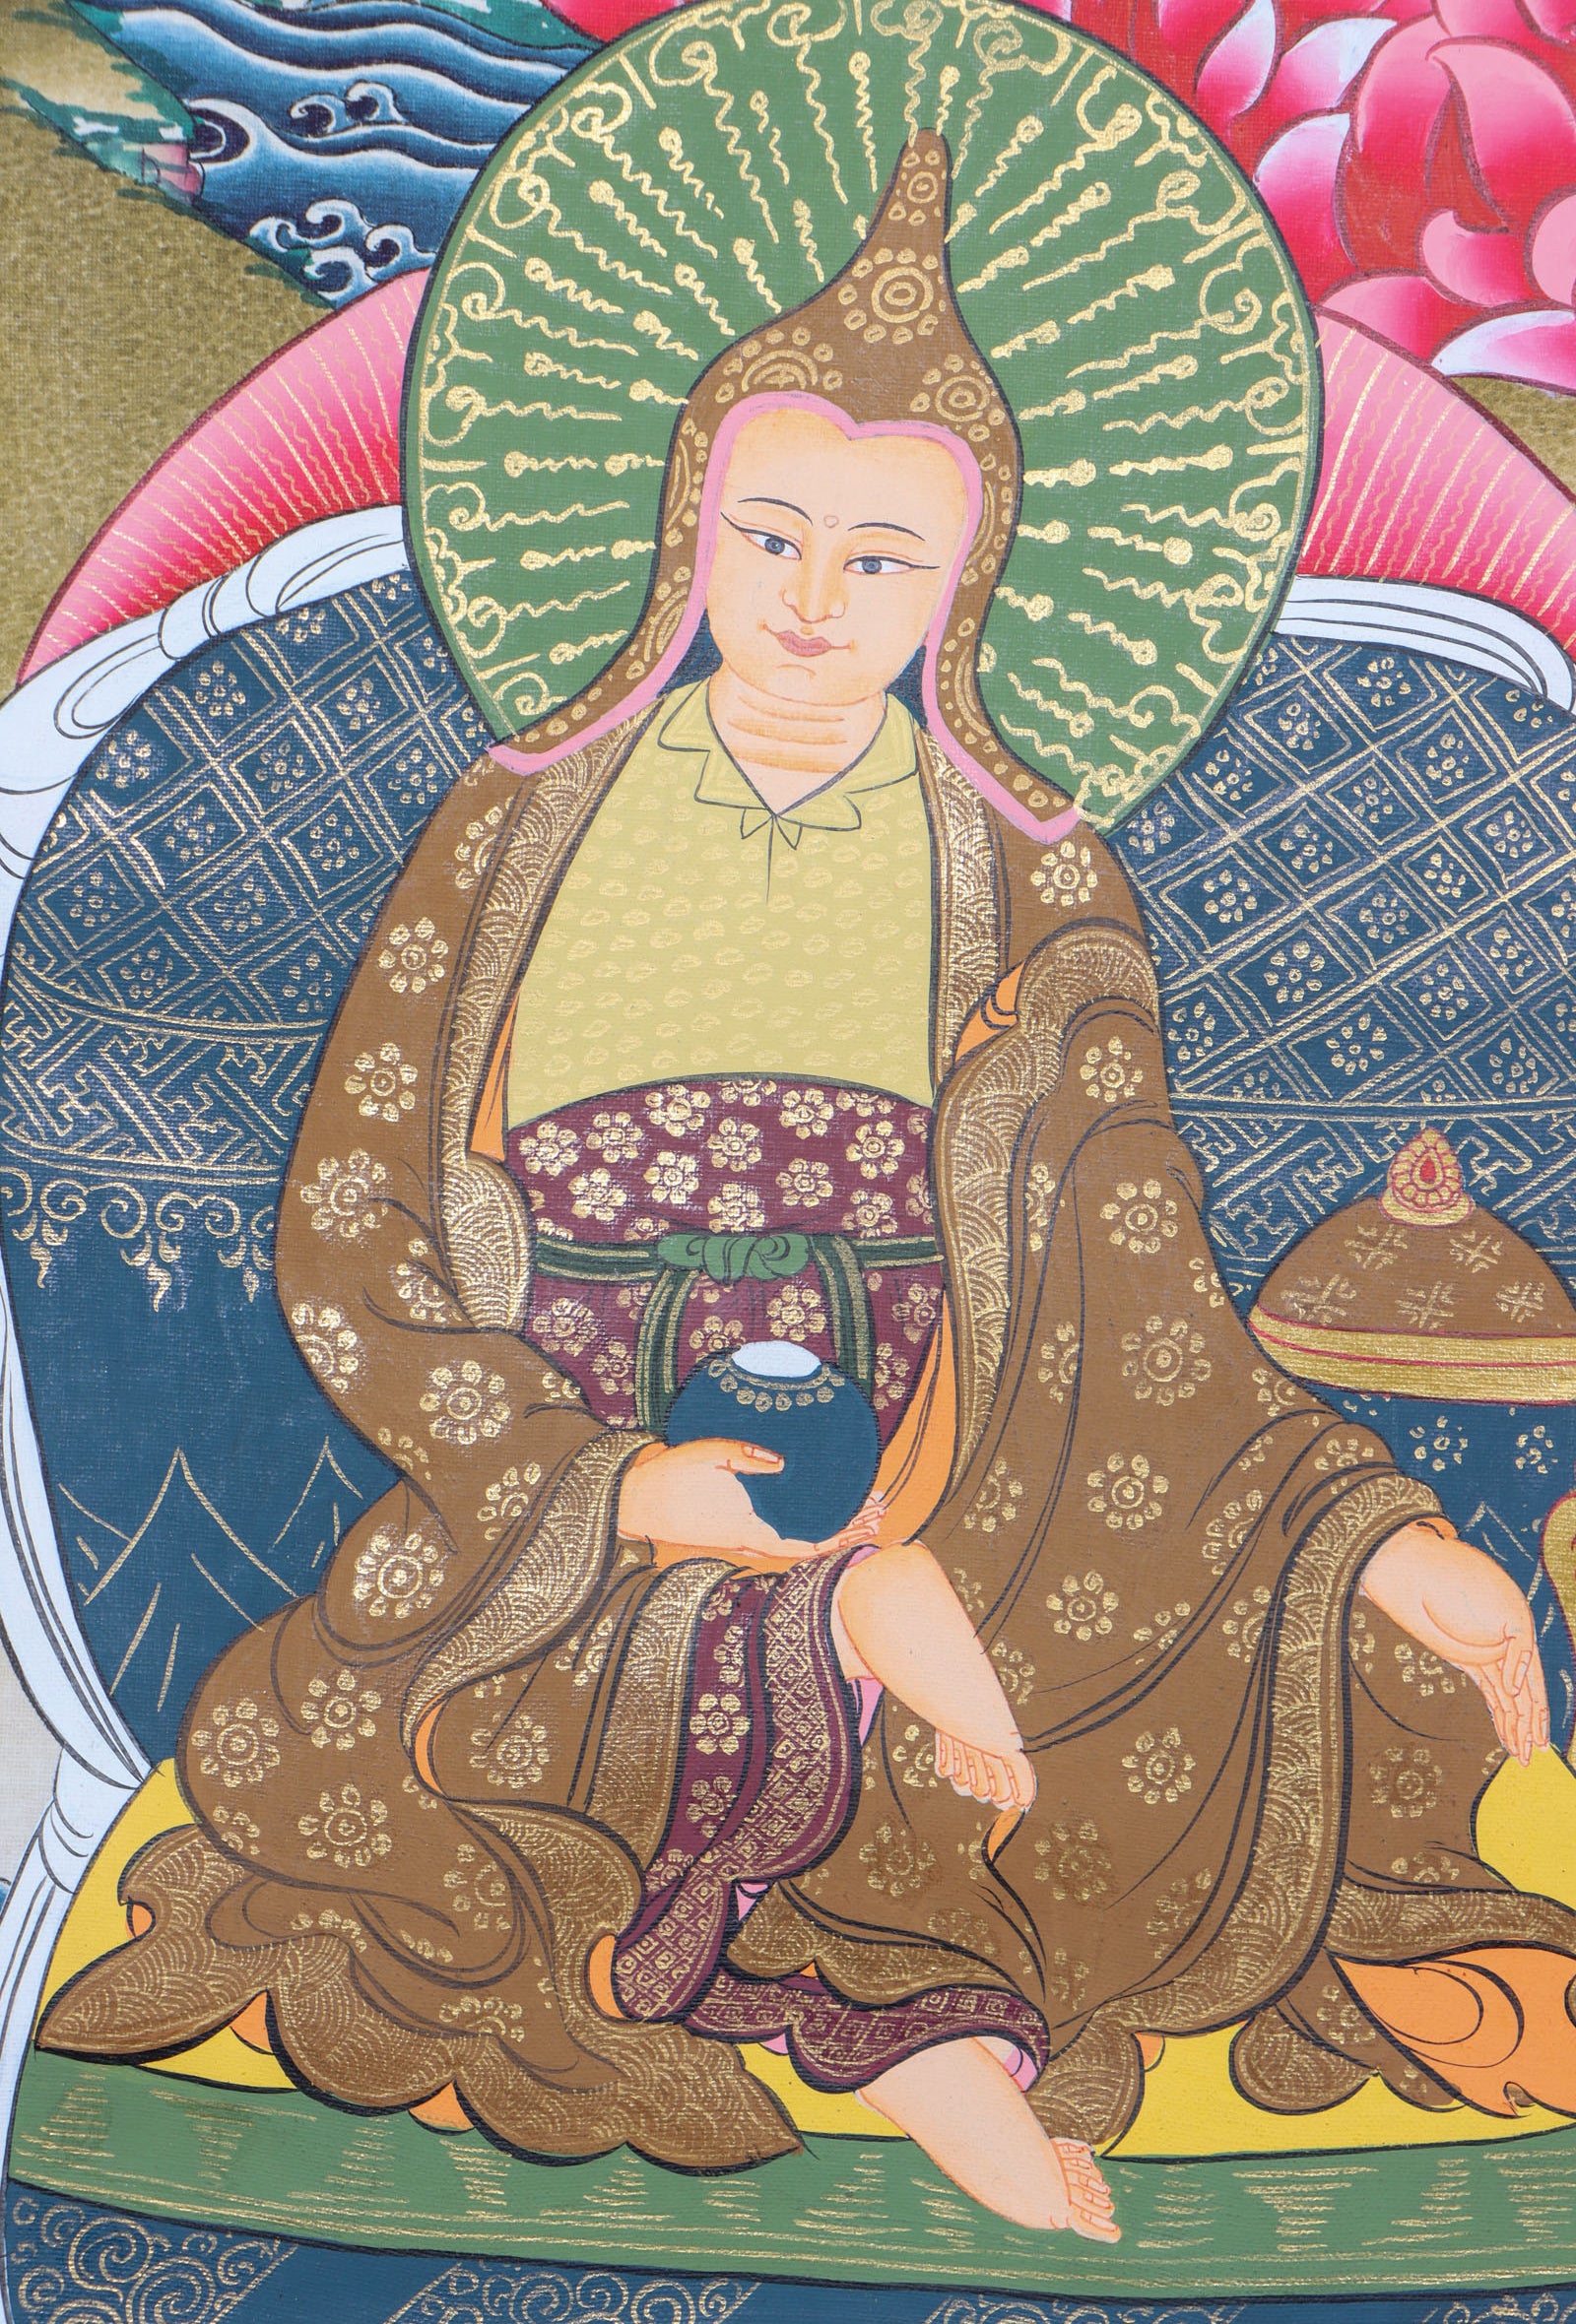 Guru Thangka Painting for spiritual guidance, protection, and the removal of obstacles.